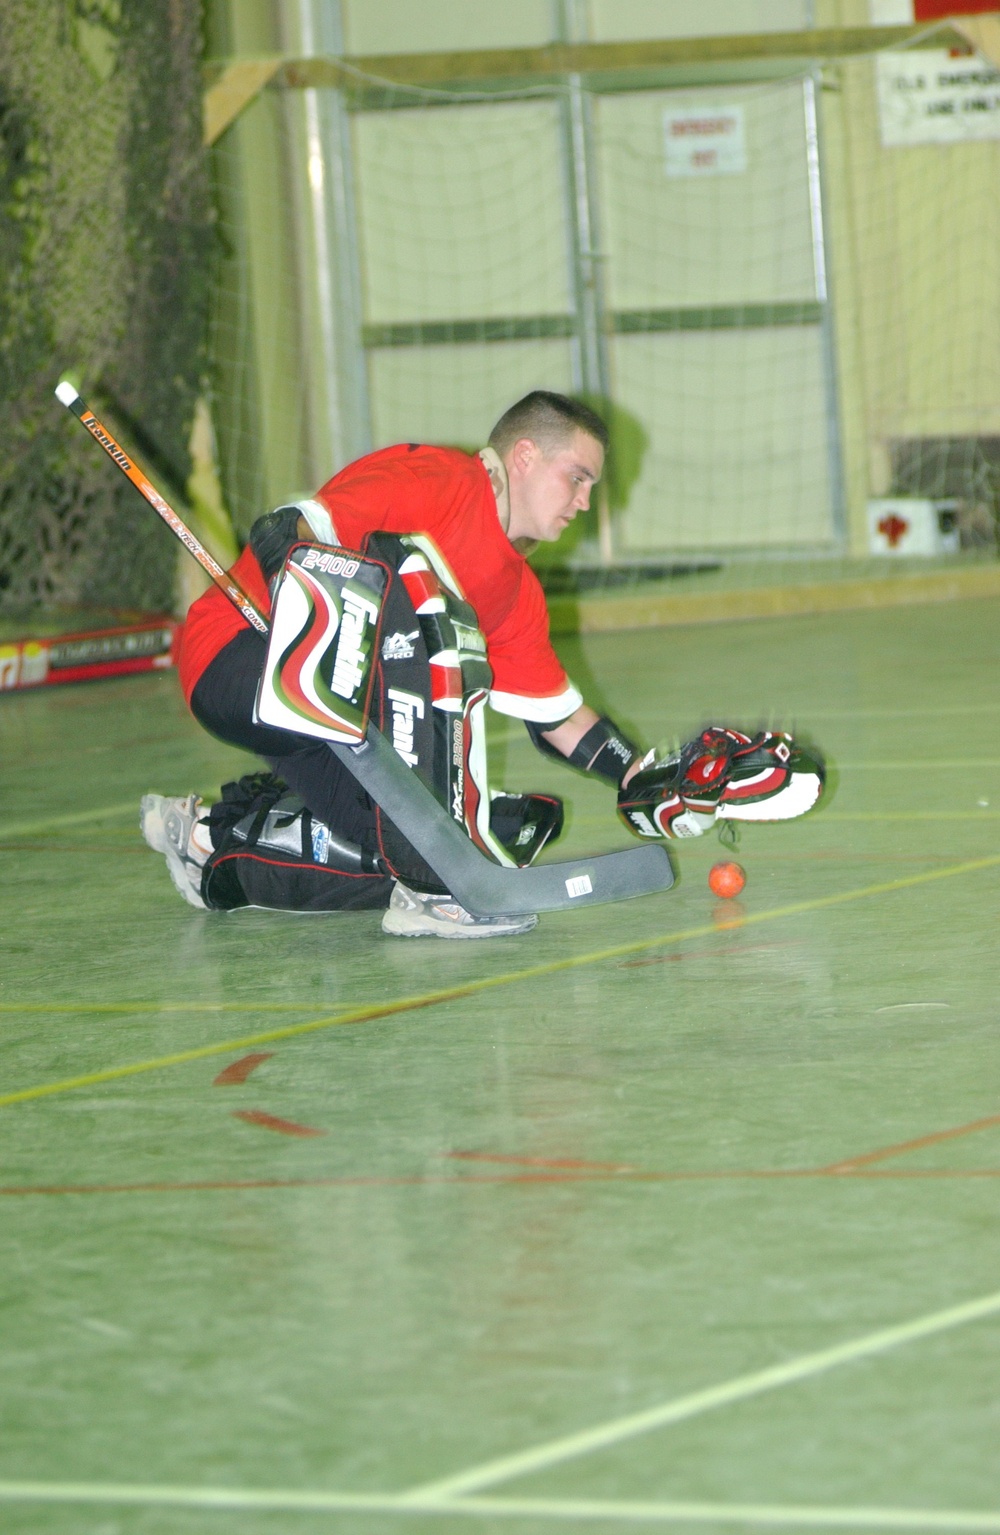 Soldiers play hockey in Iraq thanks to the pros